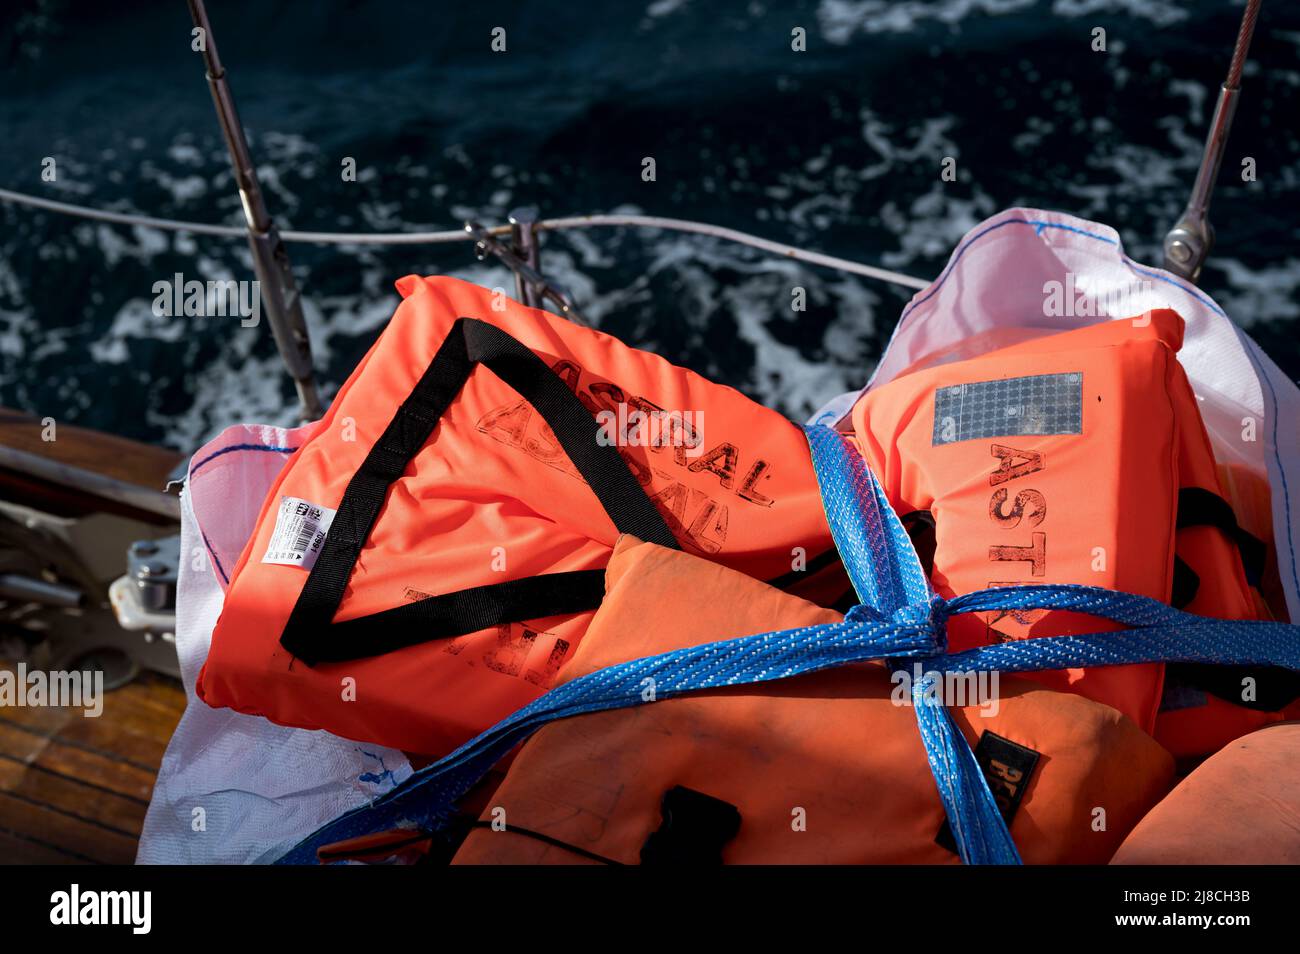 May 15, 2022, Badalona, Catanzaro, Spain: Life jackets with the word ''Astral'' seen onboard. The Spanish NGO Open Arms starts a new rescue mission in Central Mediterranean area, with their first sailboat Astral. (Credit Image: © Valeria Ferraro/ZUMA Press Wire) Stock Photo